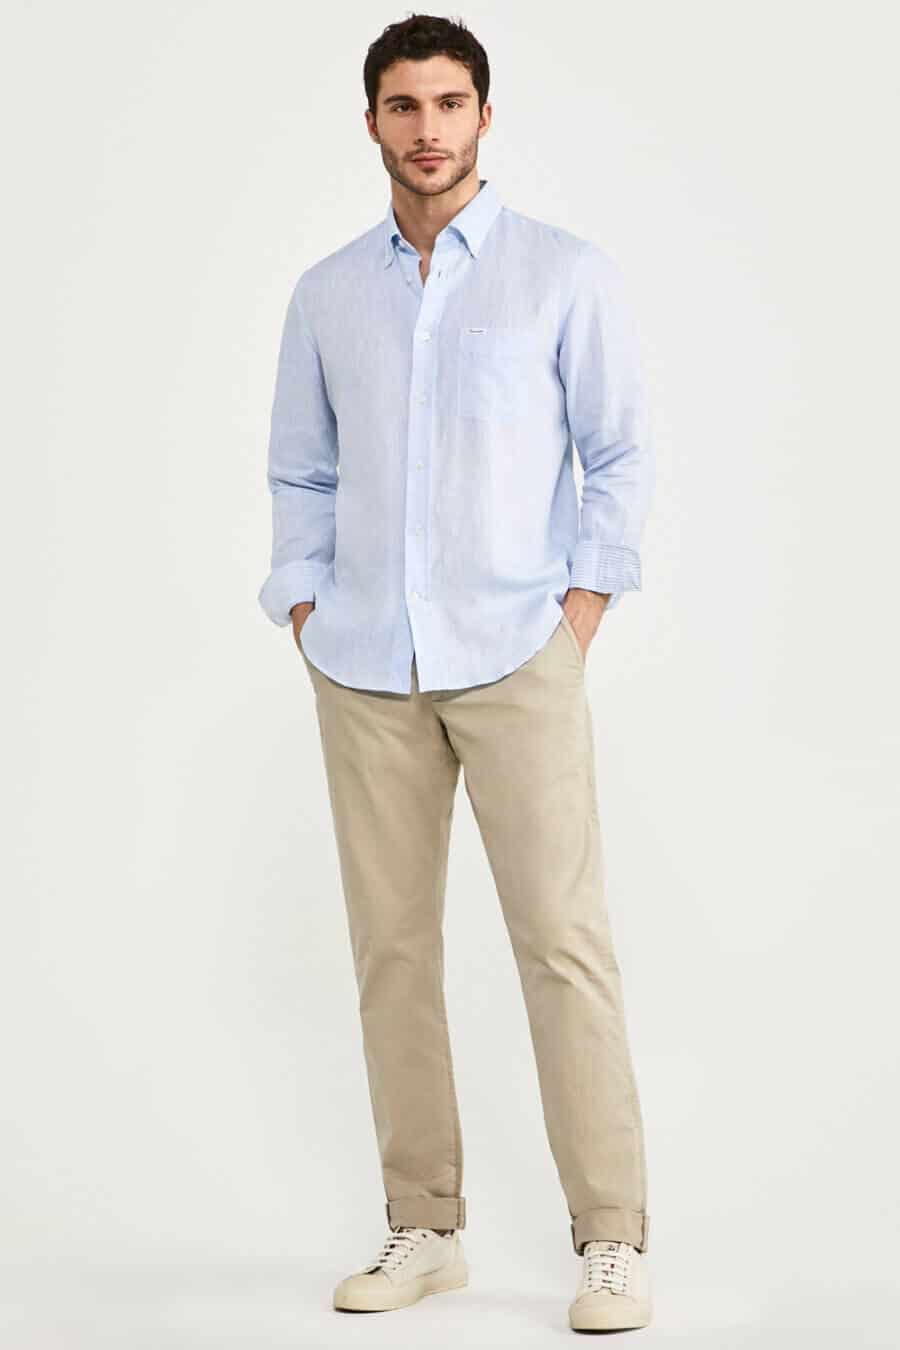 Men's khaki pants worn with a pale blue linen shirt and canvas sneakers outfit